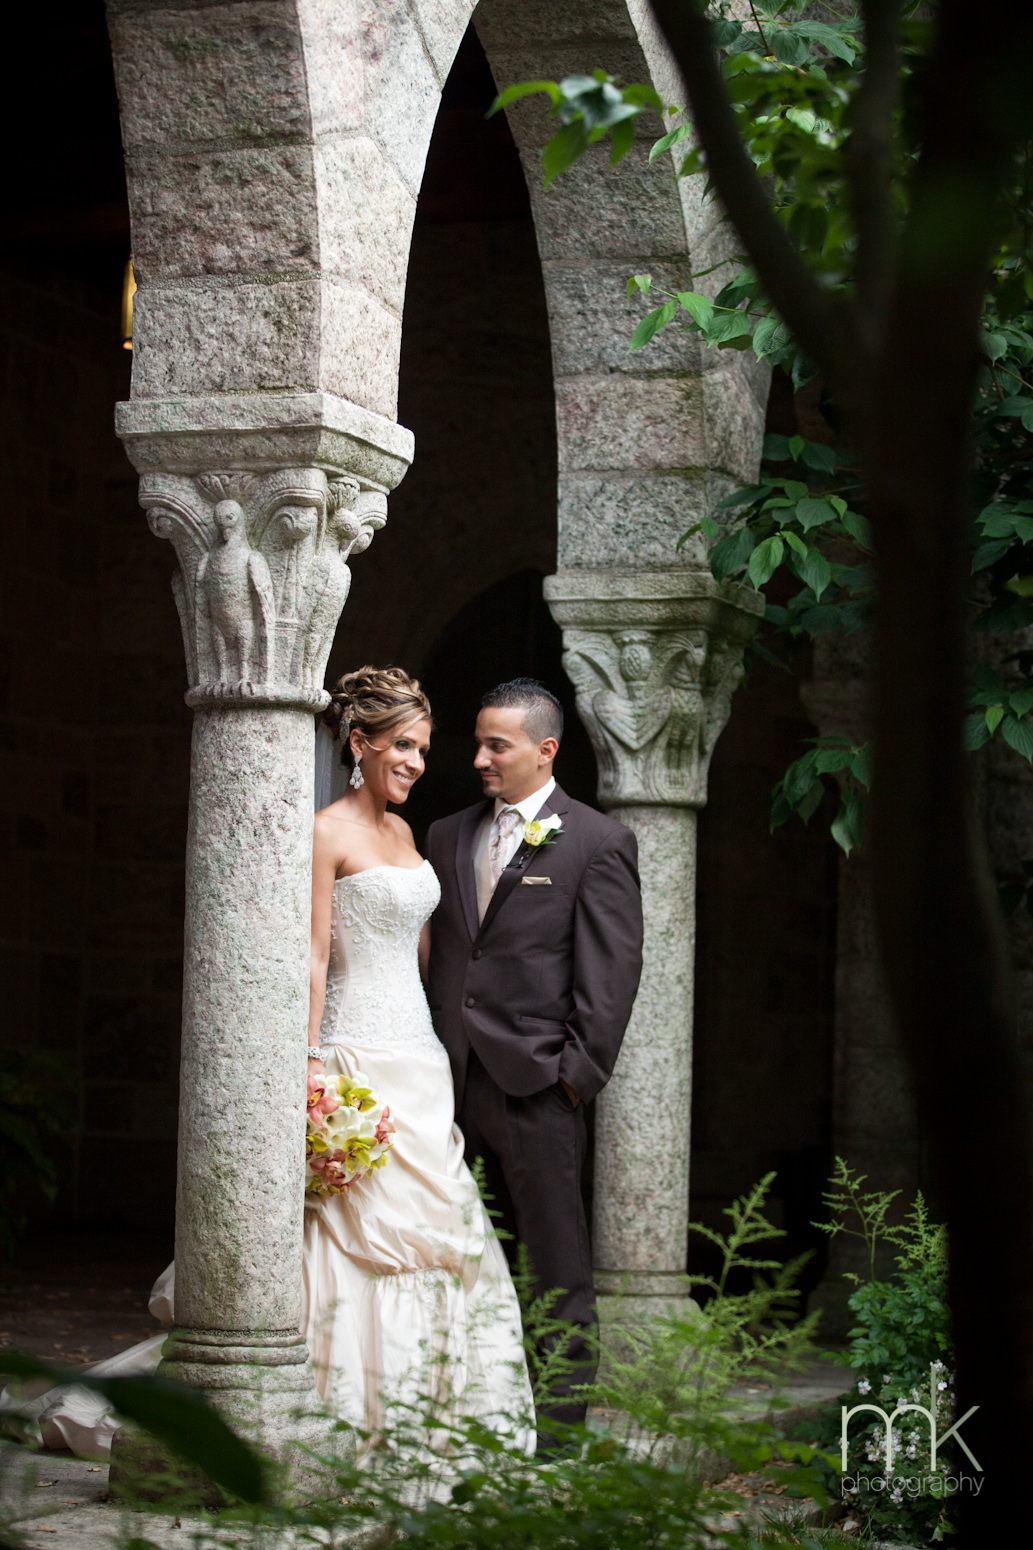 A bride in a white wedding gown leans against a column in Glencairn Museum's cloiser, while the groom in a dark suit stands next to her.